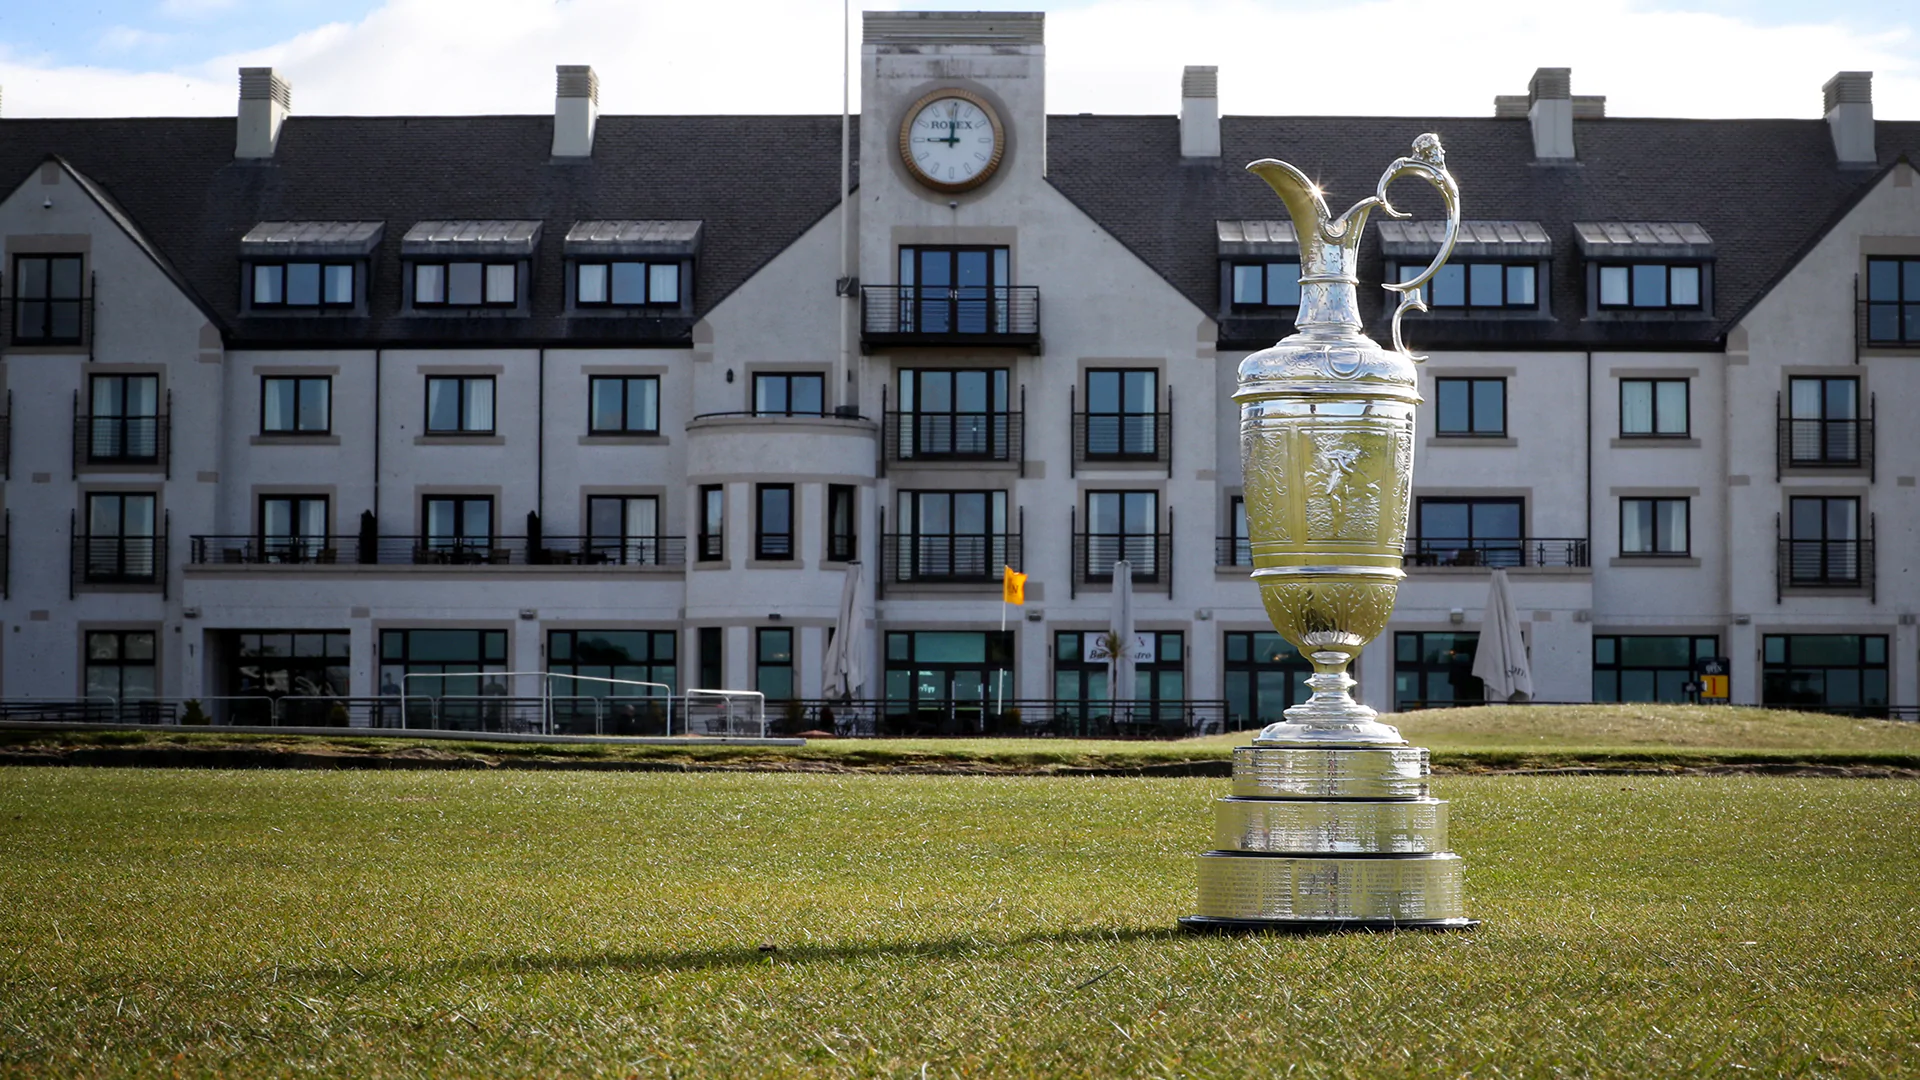 $10.5M prize purse at The Open, $1.89M to winner